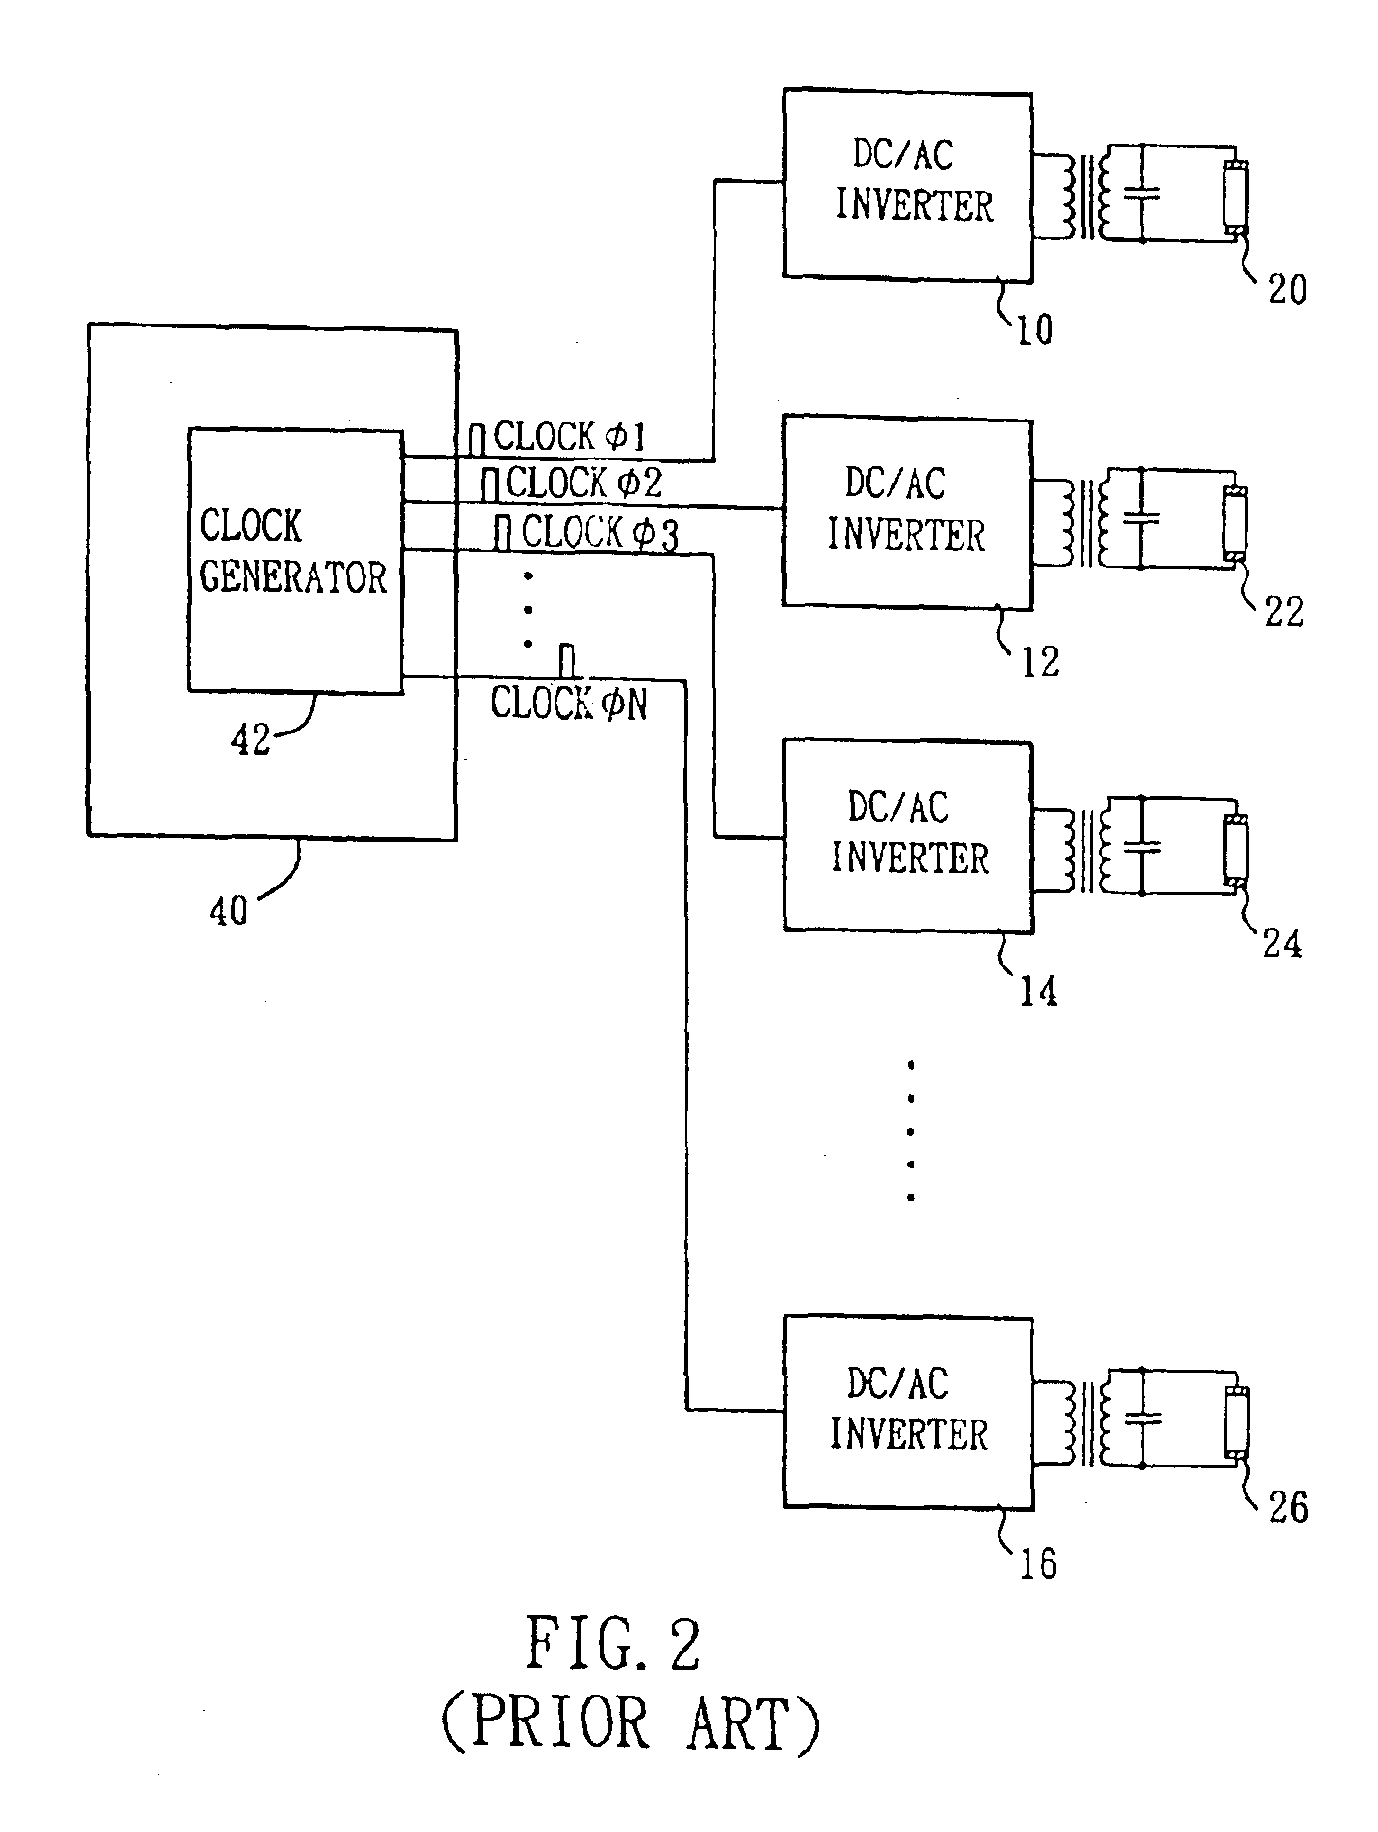 Controller circuit supplying energy to a display device